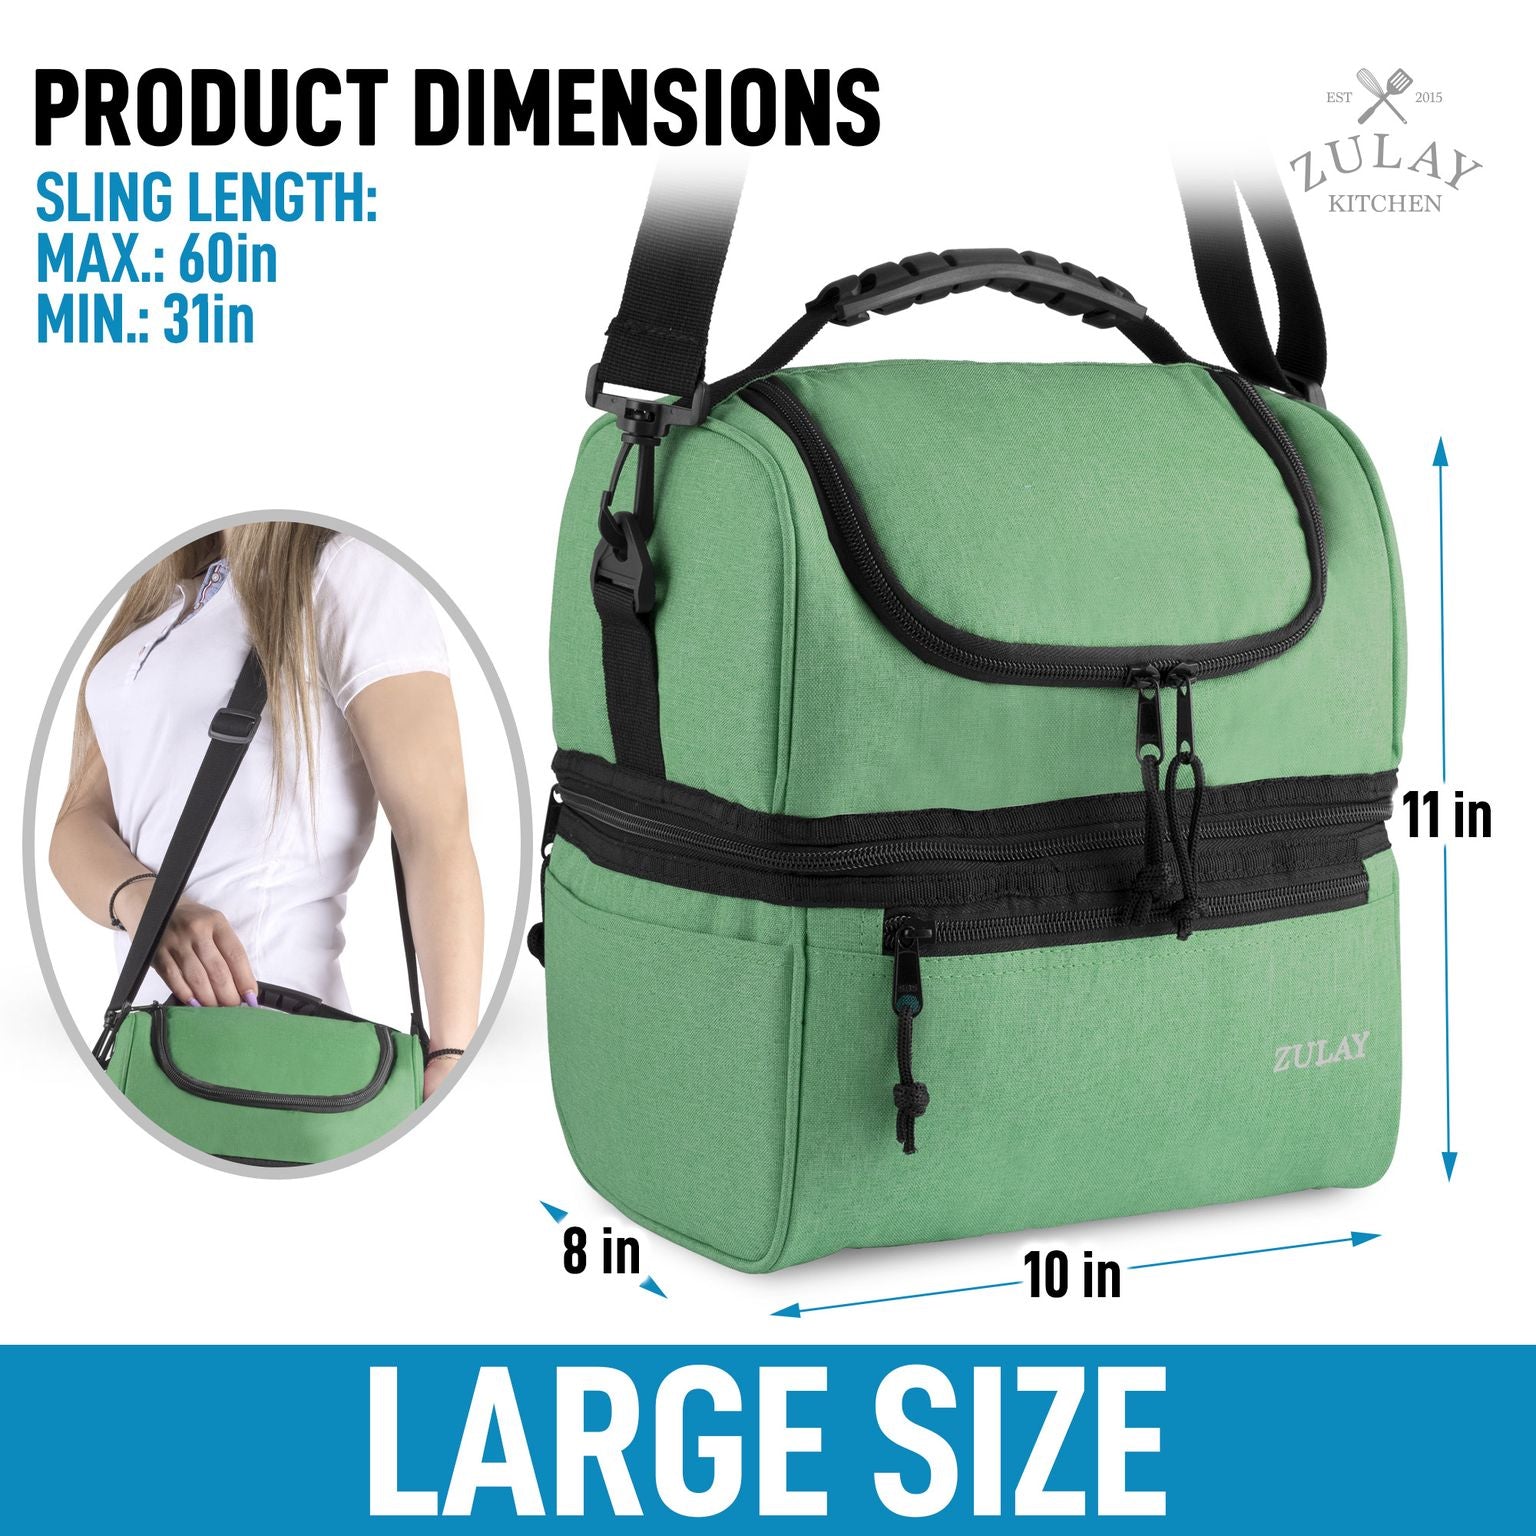 Zulay Kitchen Insulated 2-Compartment Lunch Box Bag With Strap